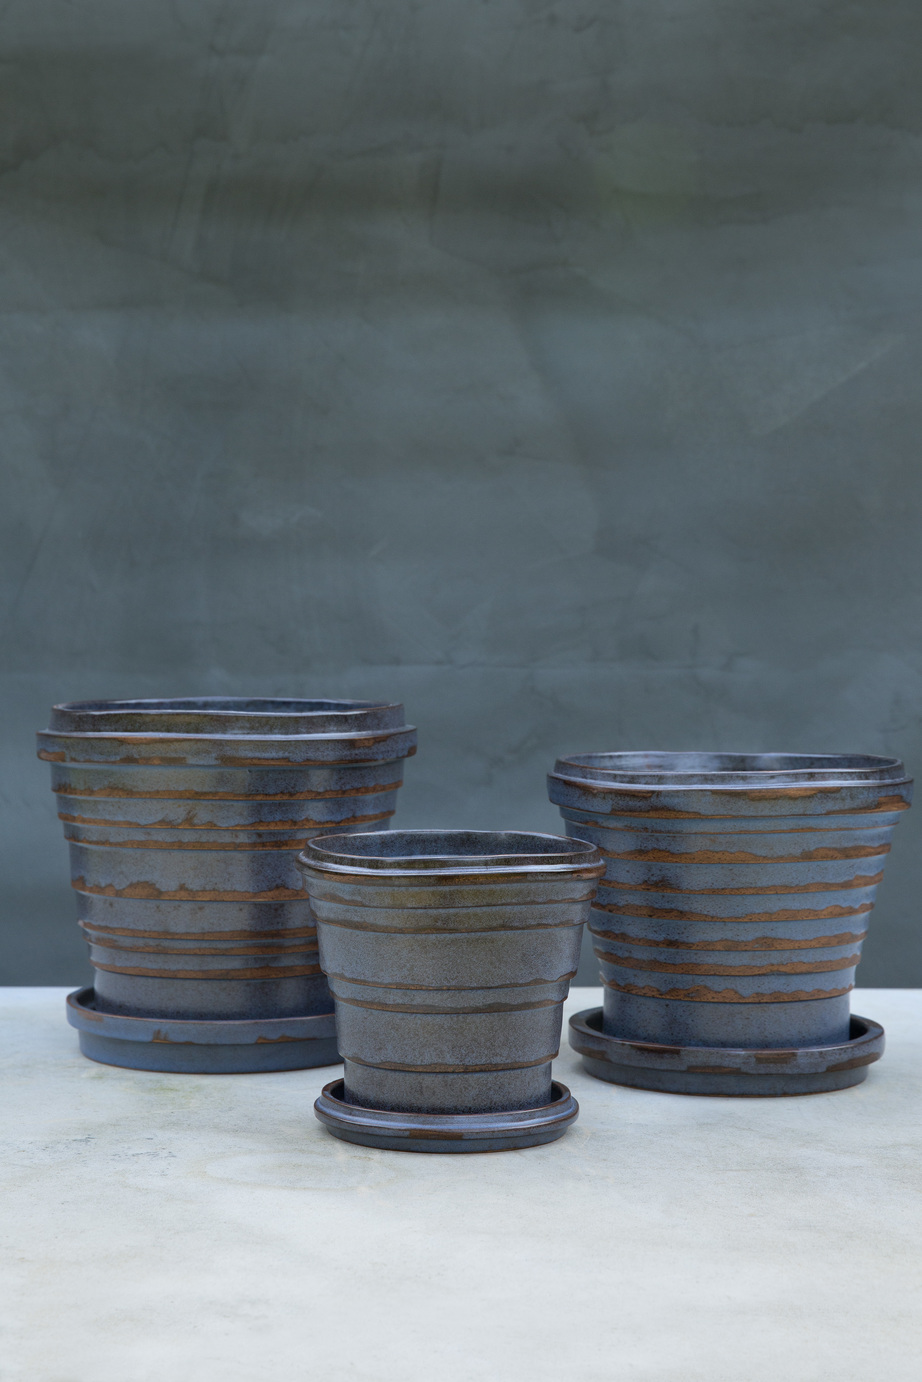 Three different sized pots, glazed blue/brown with saucers.